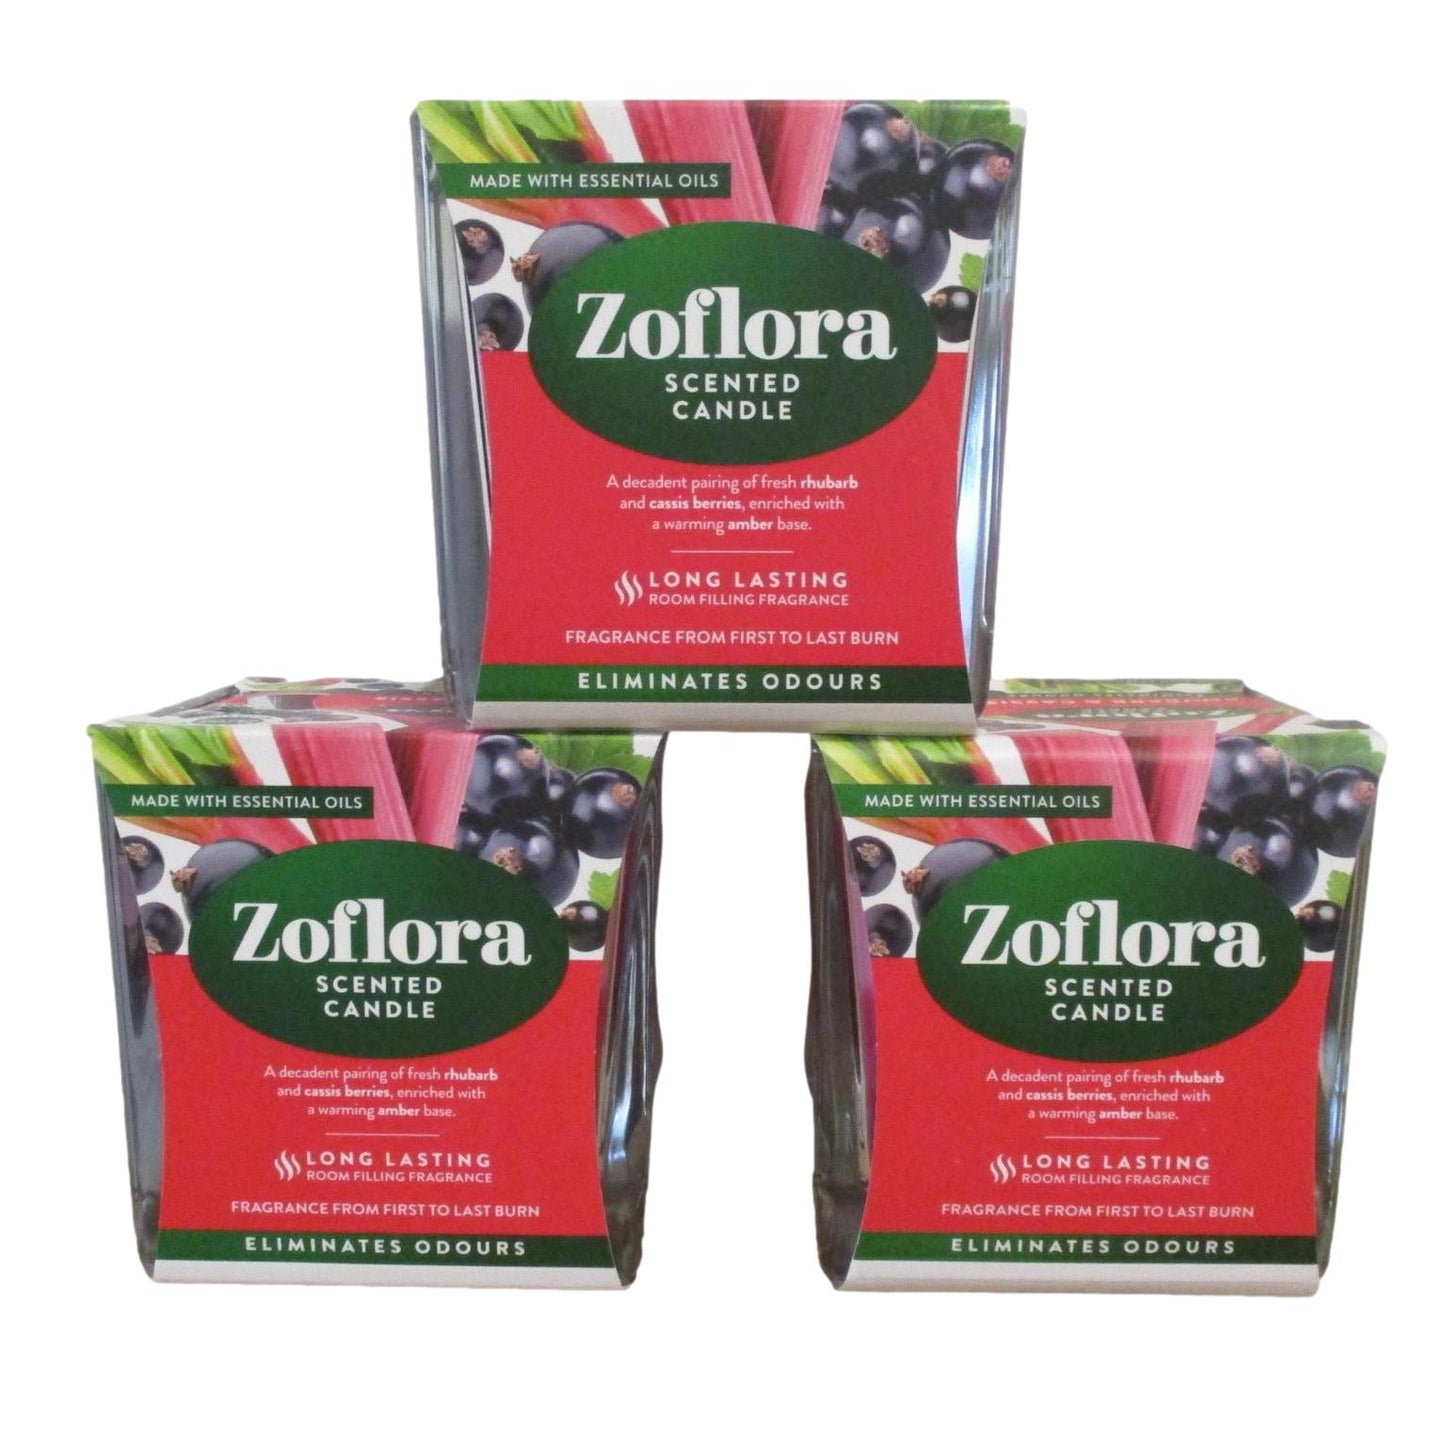 Zoflora Scented Candles - Choice: Midnight Blooms, Rhubarb & Cassis, Linen Fresh